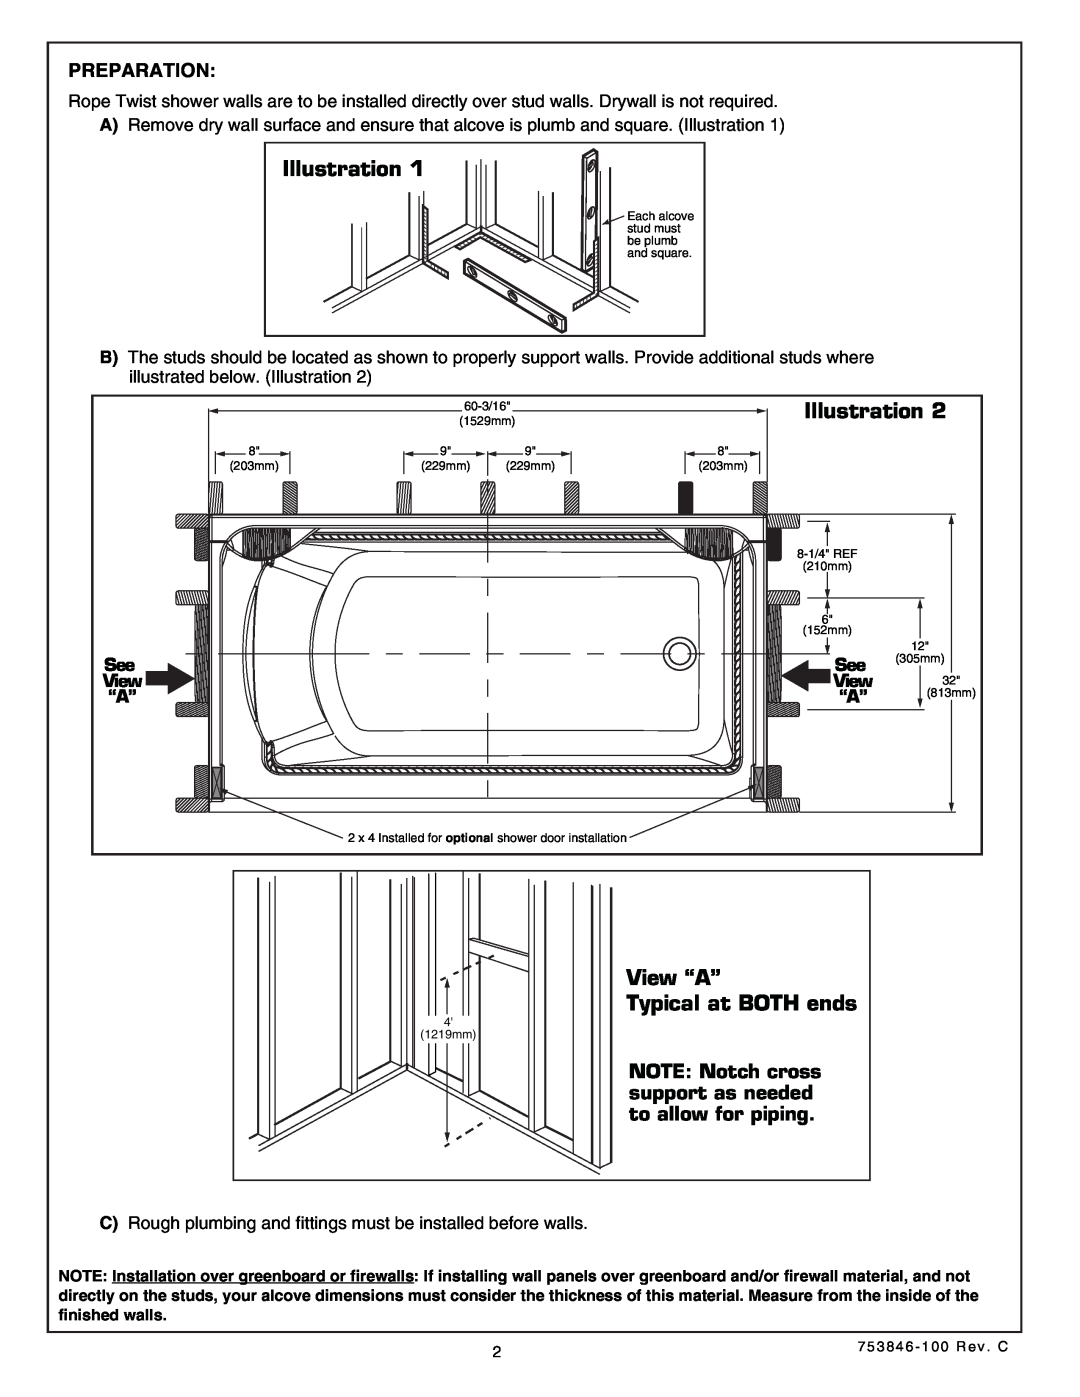 American Standard 5030.LBW, Rope Twist Bath Walls Illustration, View “A” Typical at BOTH ends, Preparation, See View “A” 